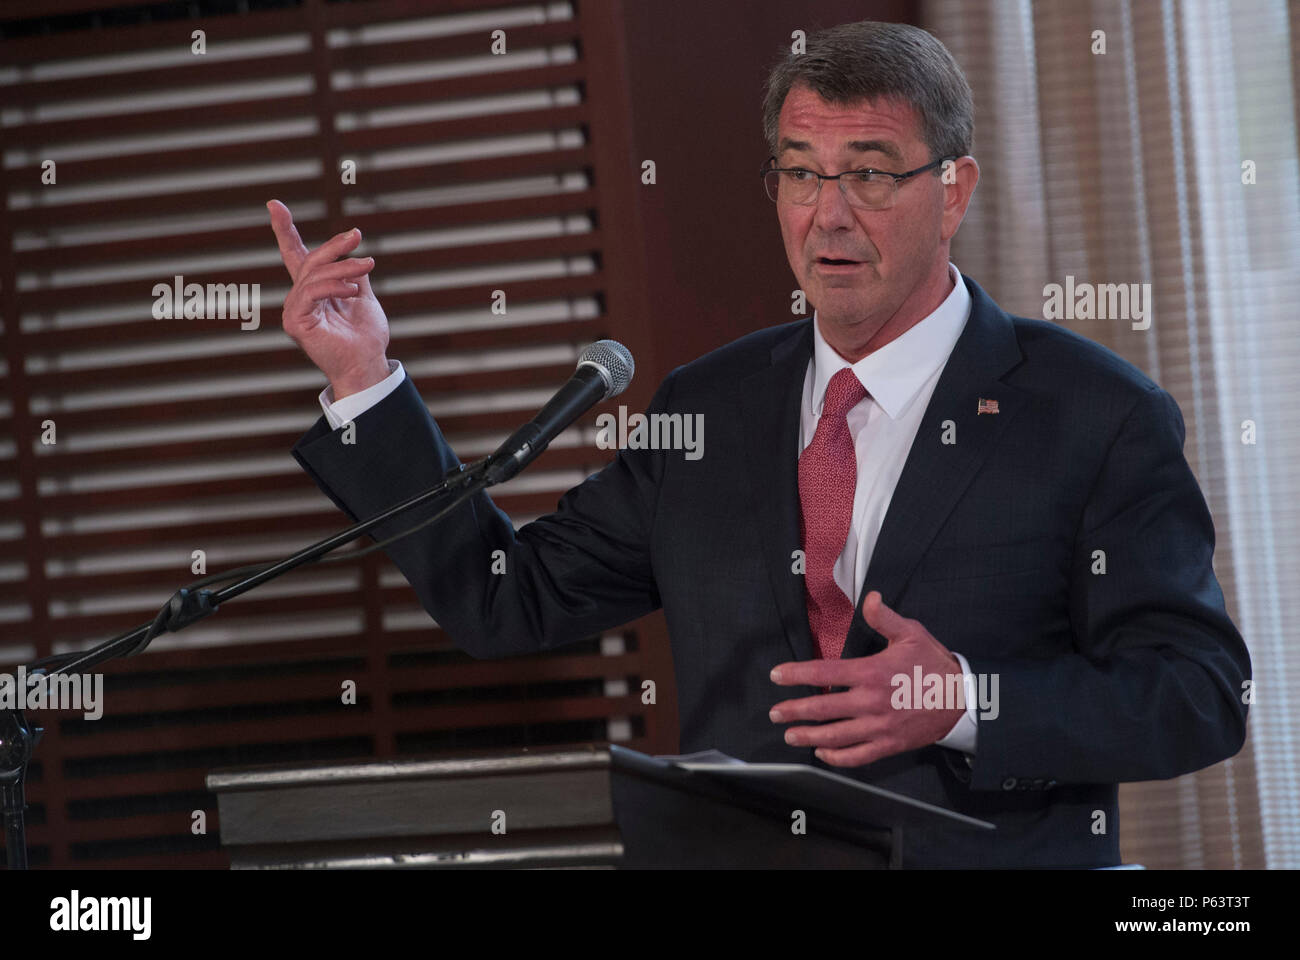 Secretary of Defense Ash Carter delivers remarks during a joint press conference with Philippine Secretary of National Defense Voltaire Gazmin at the Malacanang Palace in Manila, Philippines April 14, 2016. Carter is visiting the Philippines to solidify the rebalance to the Asia-Pacific region.(Photo by Senior Master Sgt. Adrian Cadiz) Stock Photo